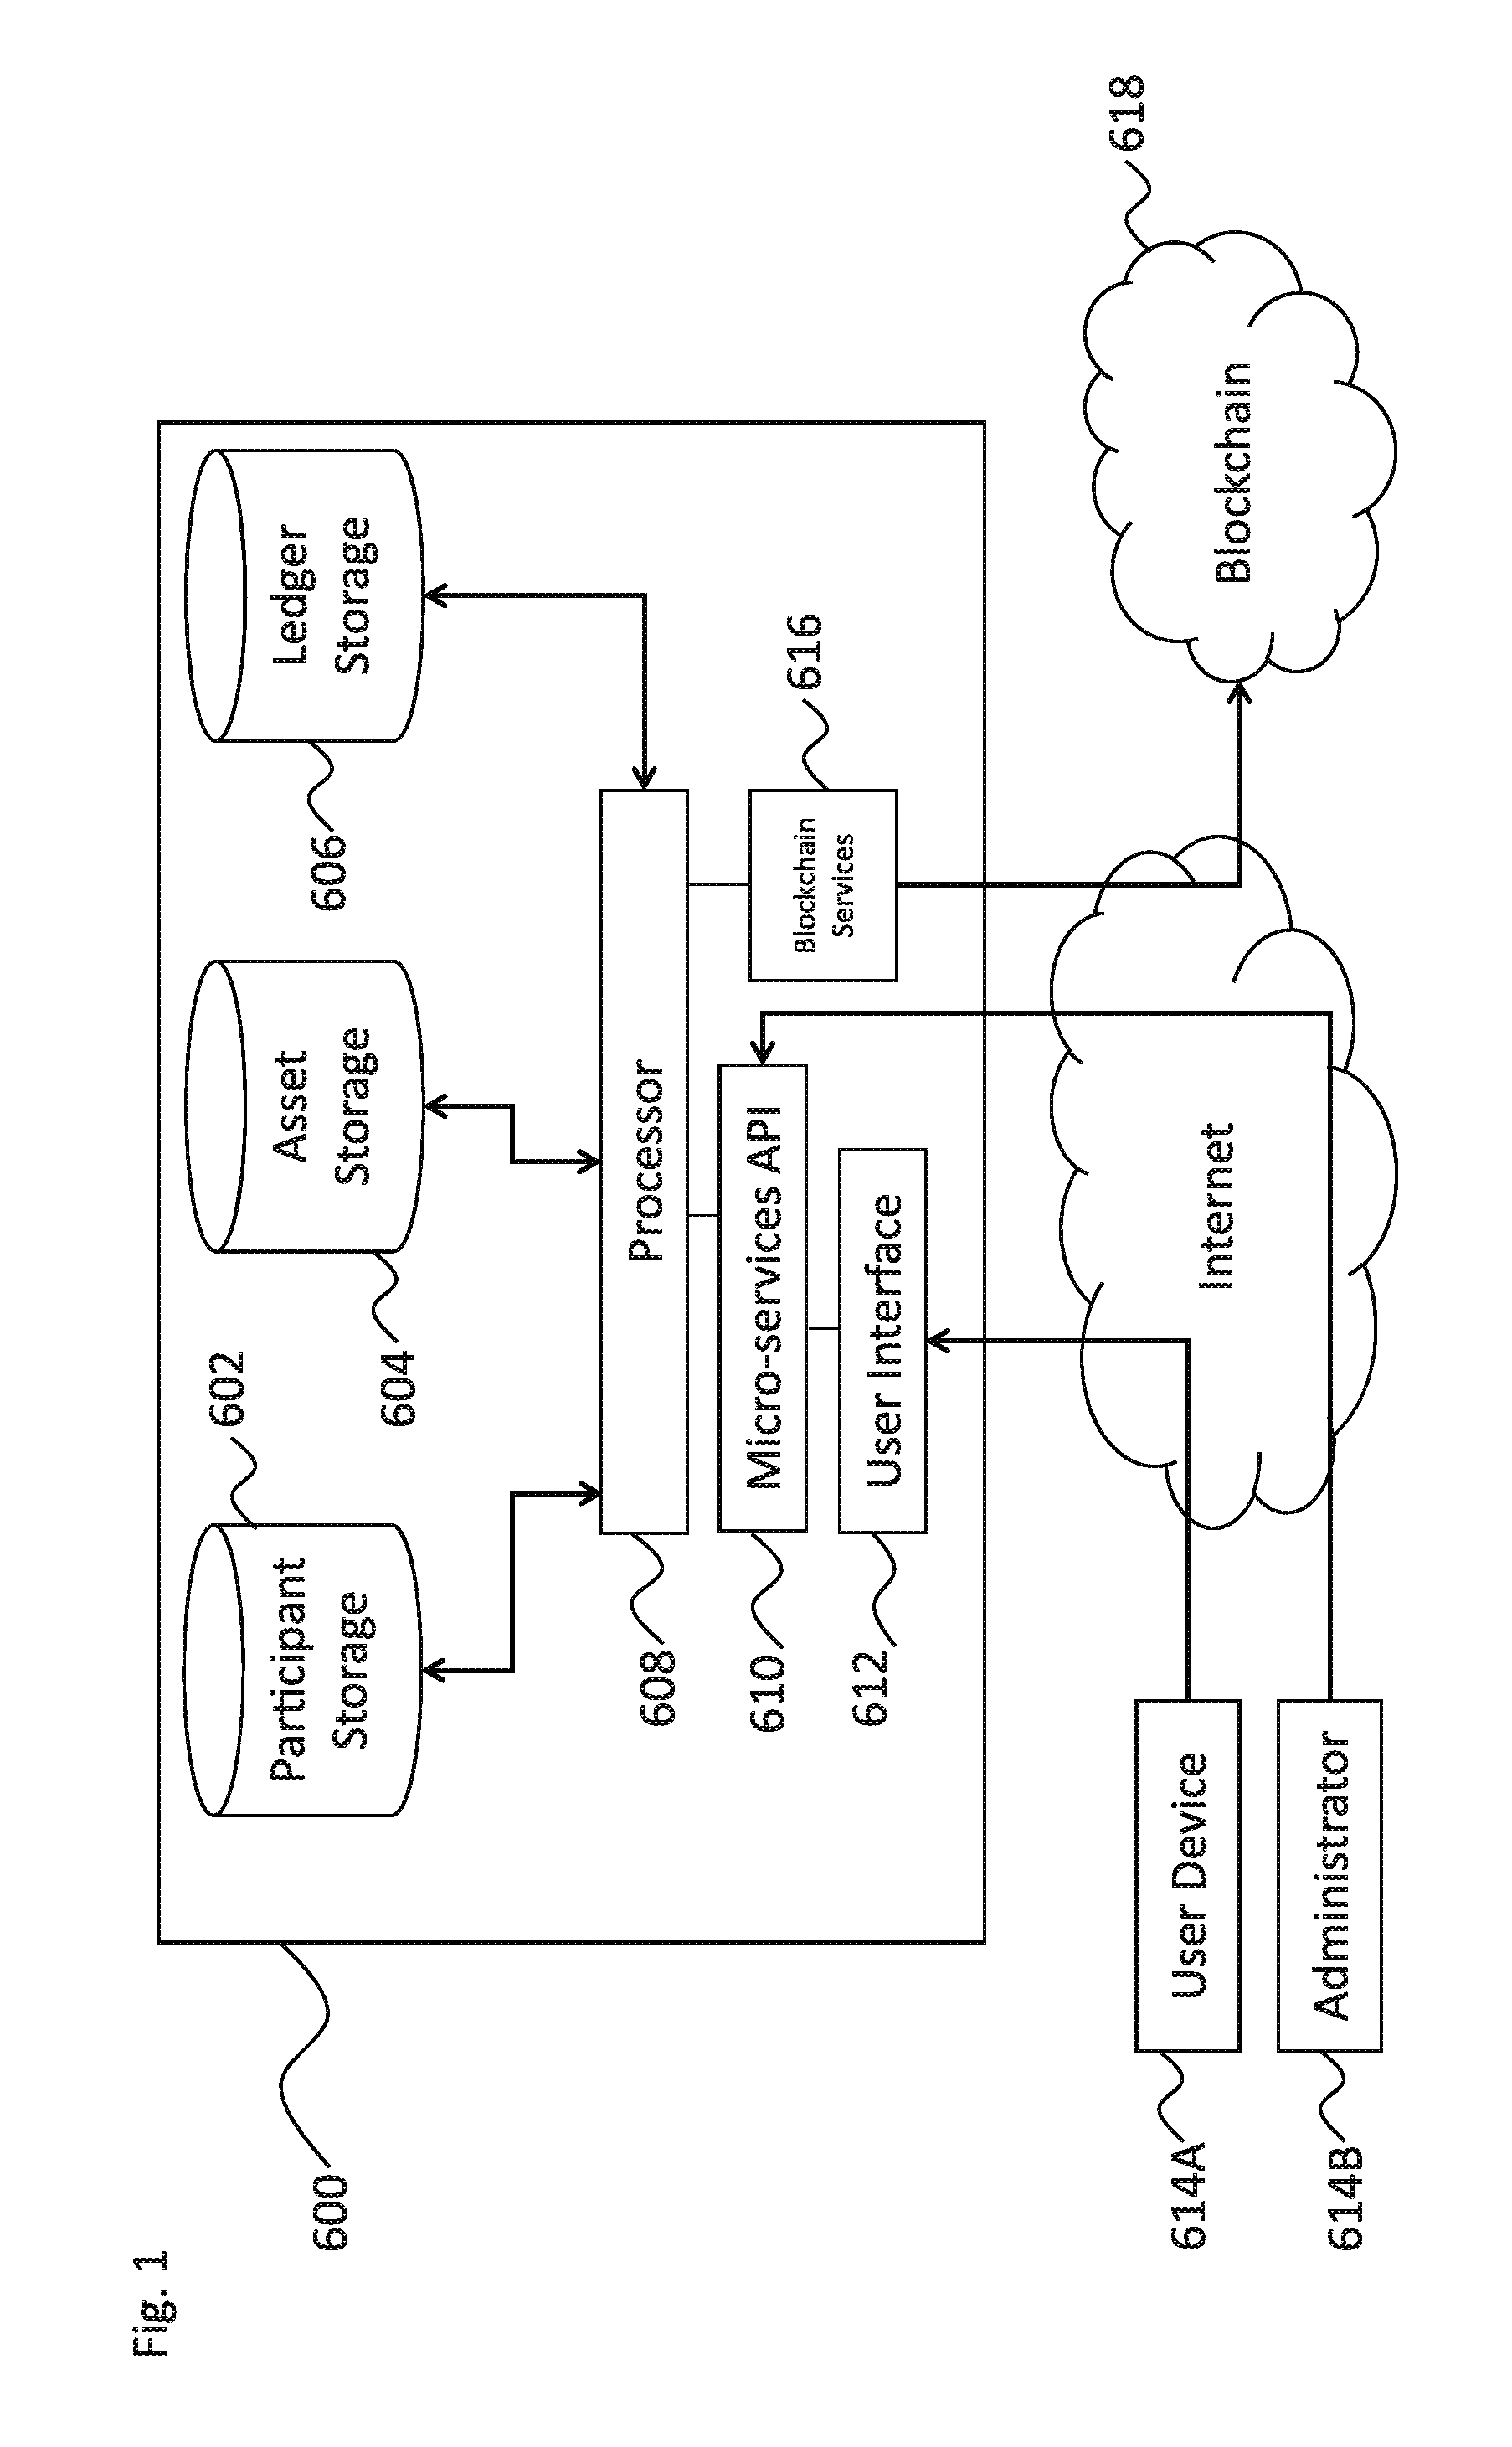 Systems and methods of secure provenance for distributed transaction databases